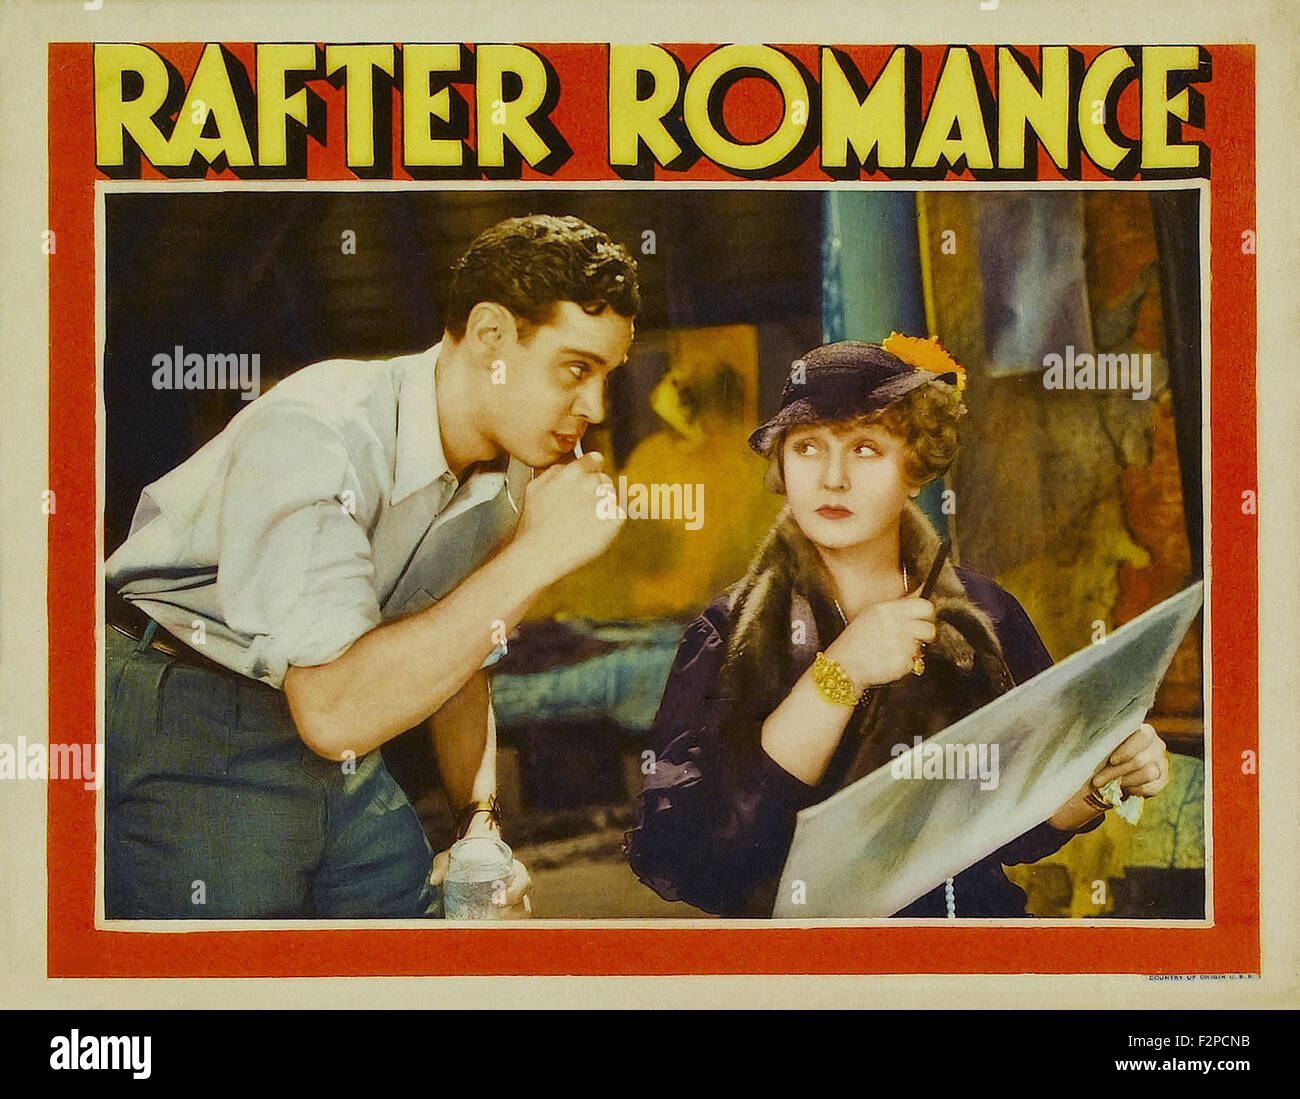 Rafter Romance - Film Poster Banque D'Images